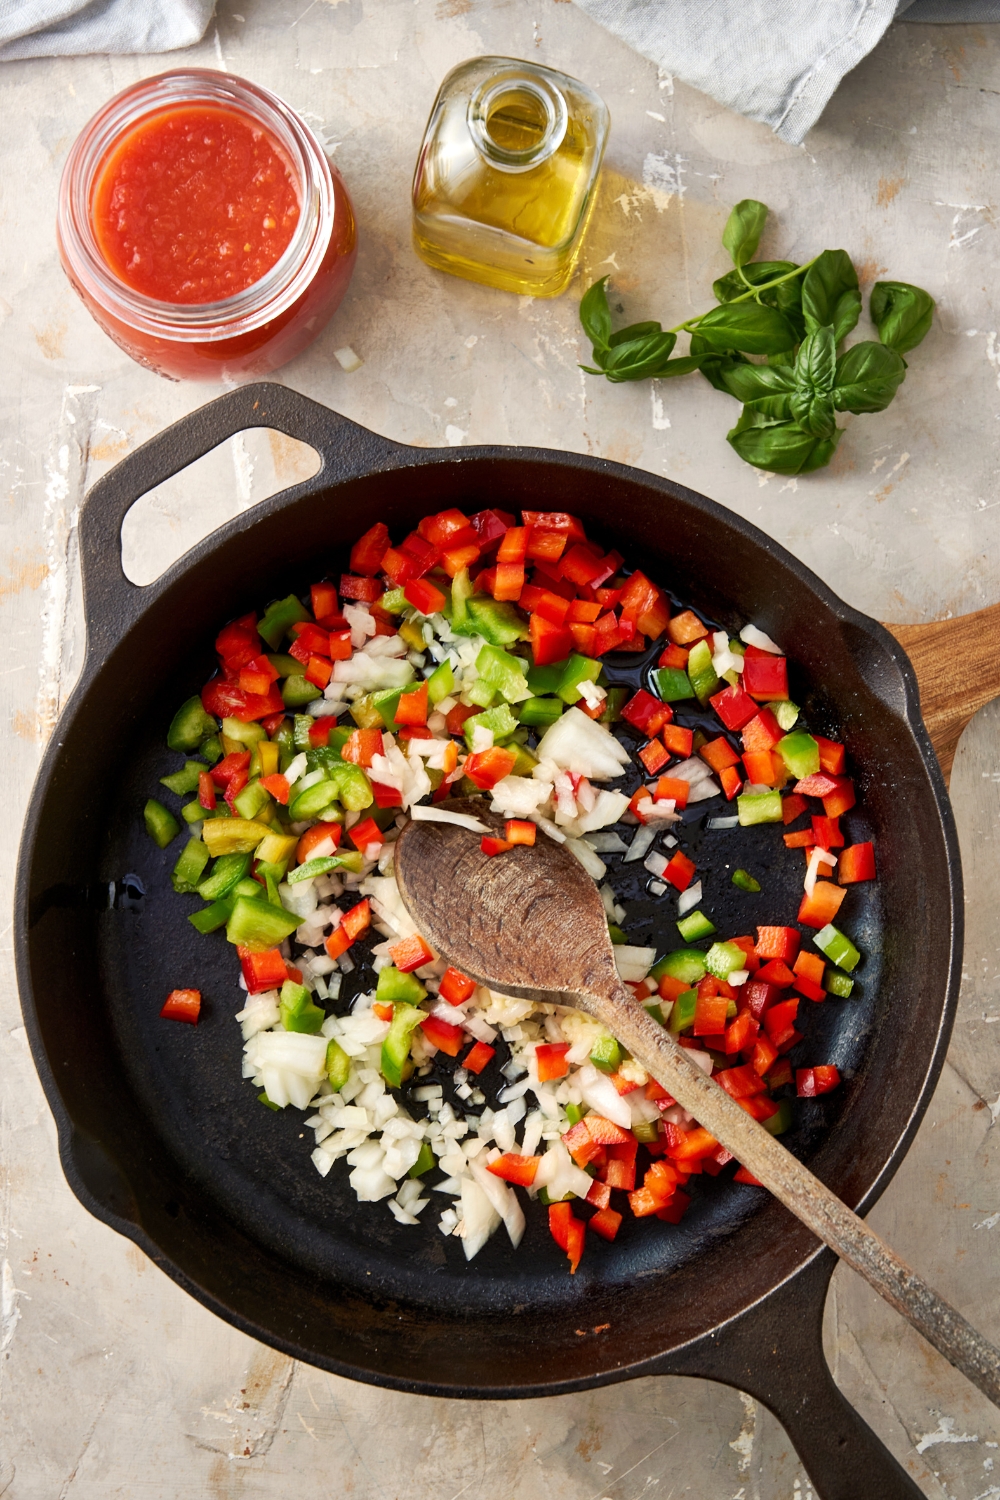 Diced bell peppers and onion are cooking in a cast iron pan. A wooden spoon rests in the pan.